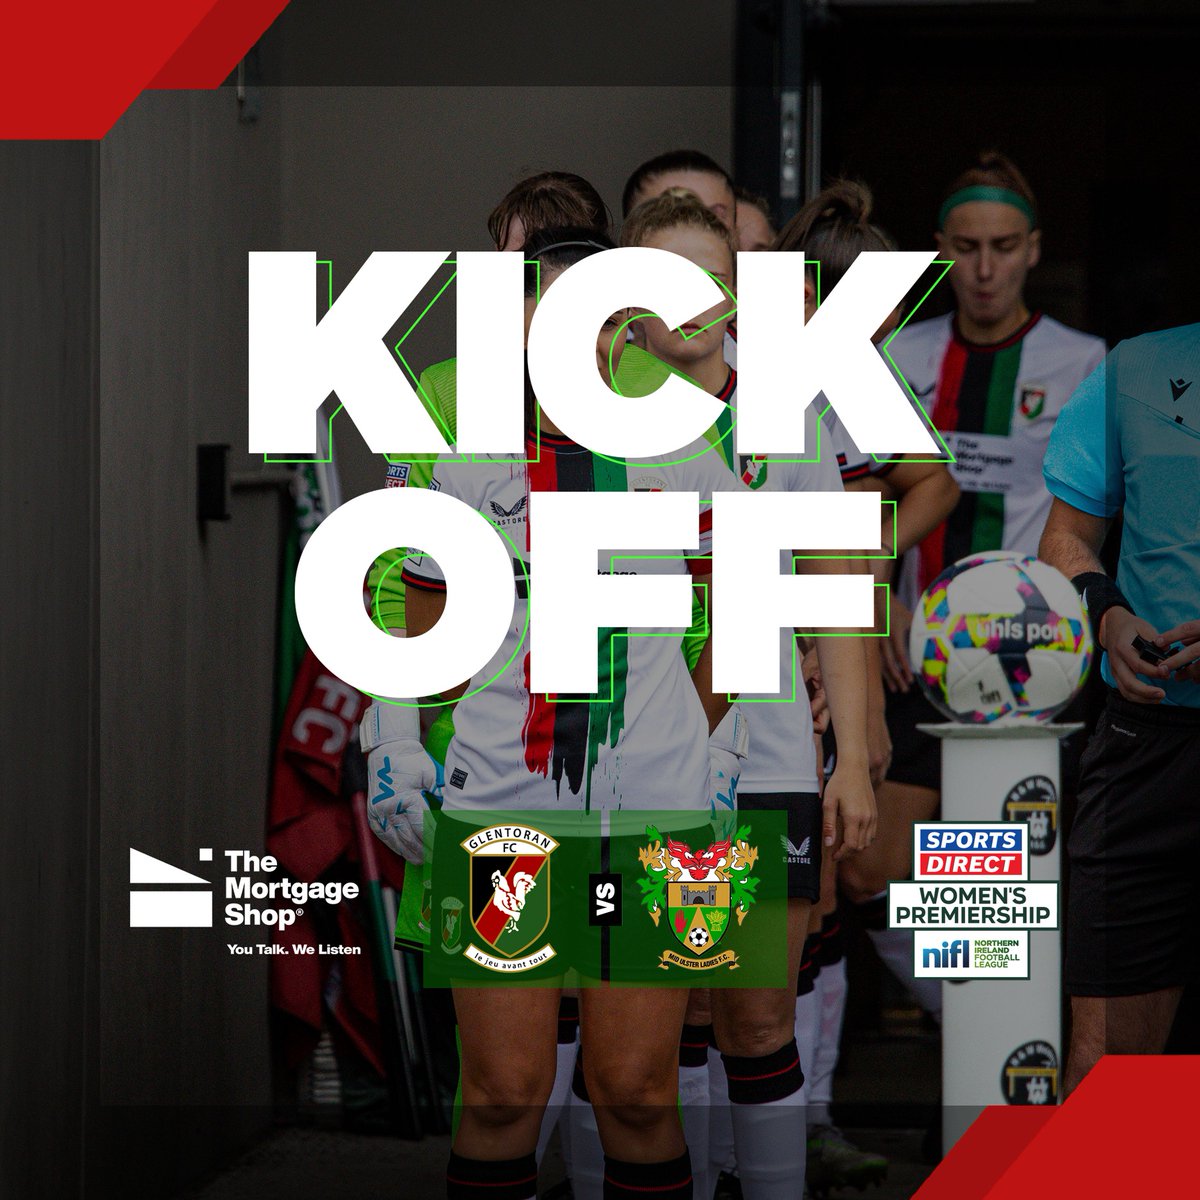 𝗞𝗜𝗖𝗞 𝗢𝗙𝗙! ⚽
The warm ups are complete, the teams are out and.... we're......off!!!  MD3 of the Sports Direct Women's Premiership season has started! (You didn't miss a game, we'd a free week in MD2 😉)